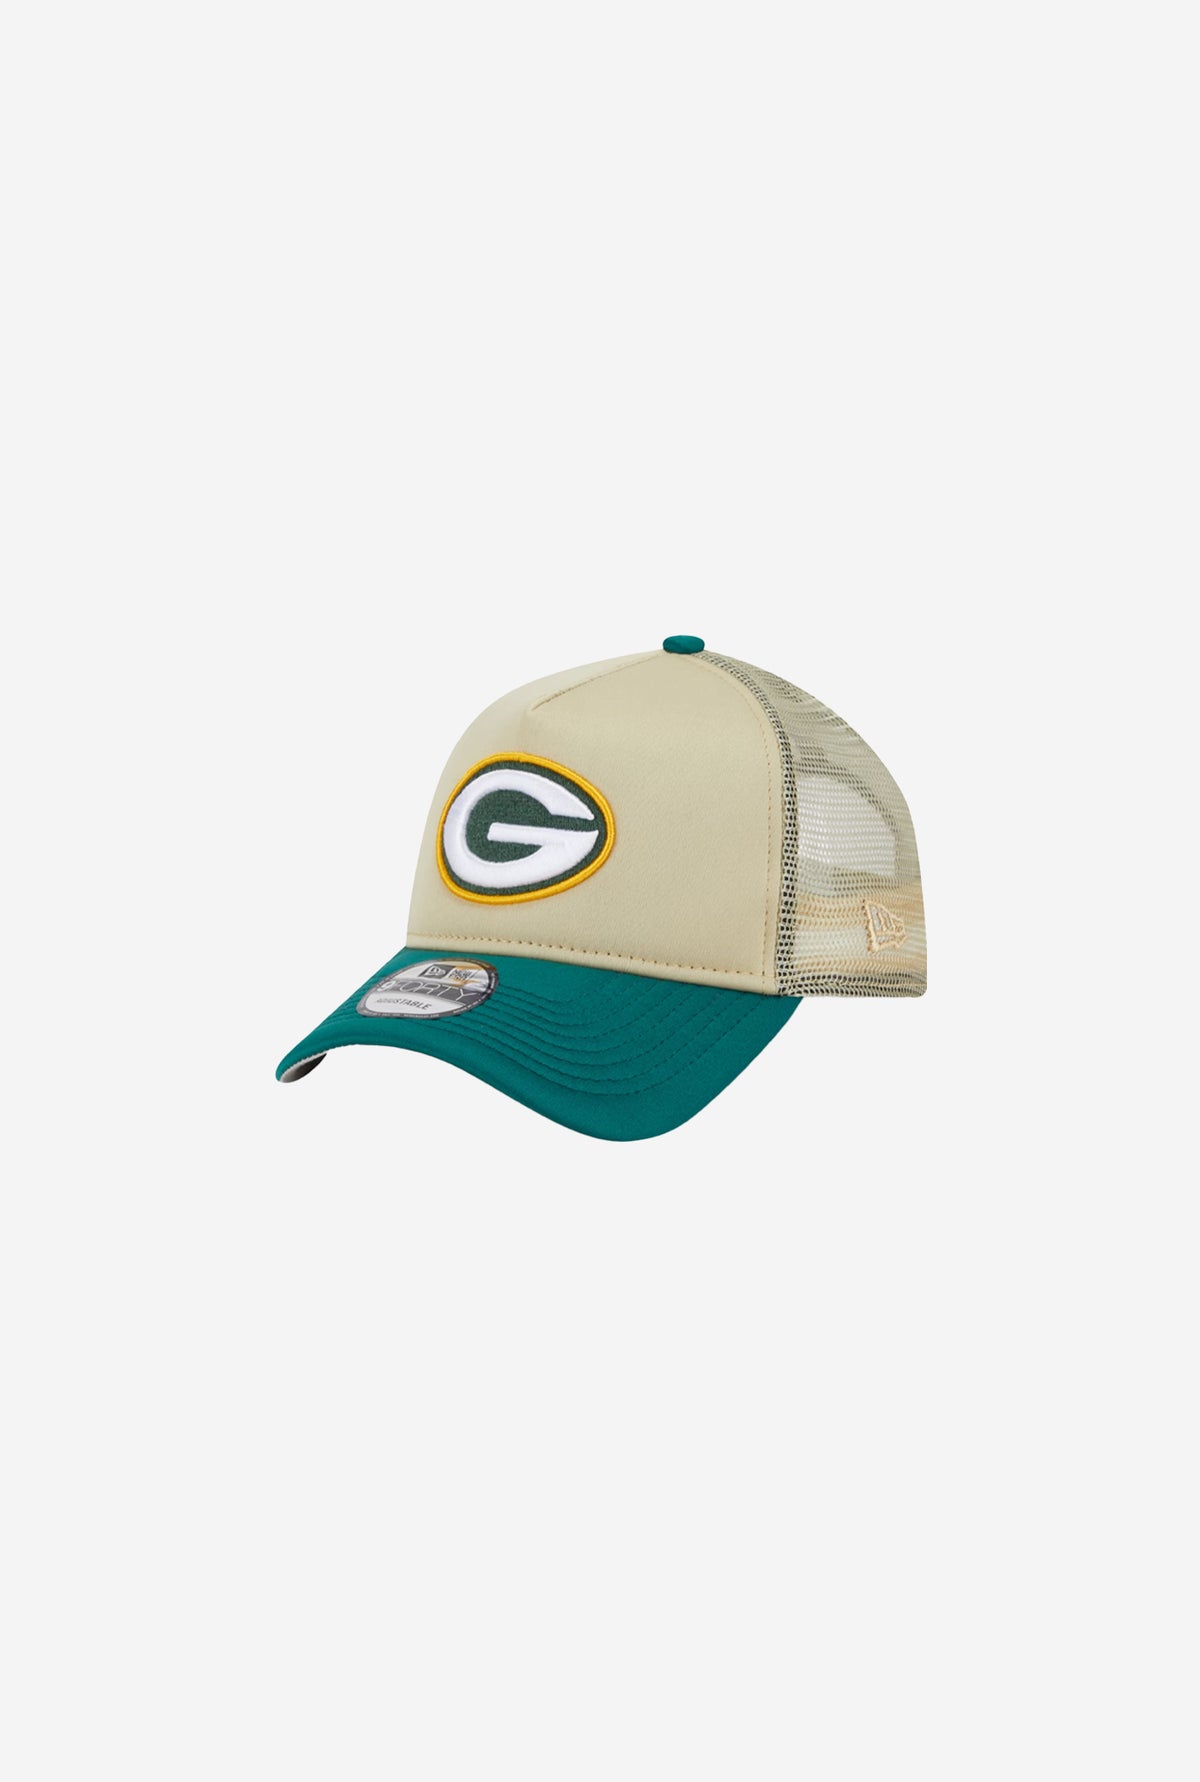 Green Bay Packers 9FORTY A-Frame All Day Trucker OTC